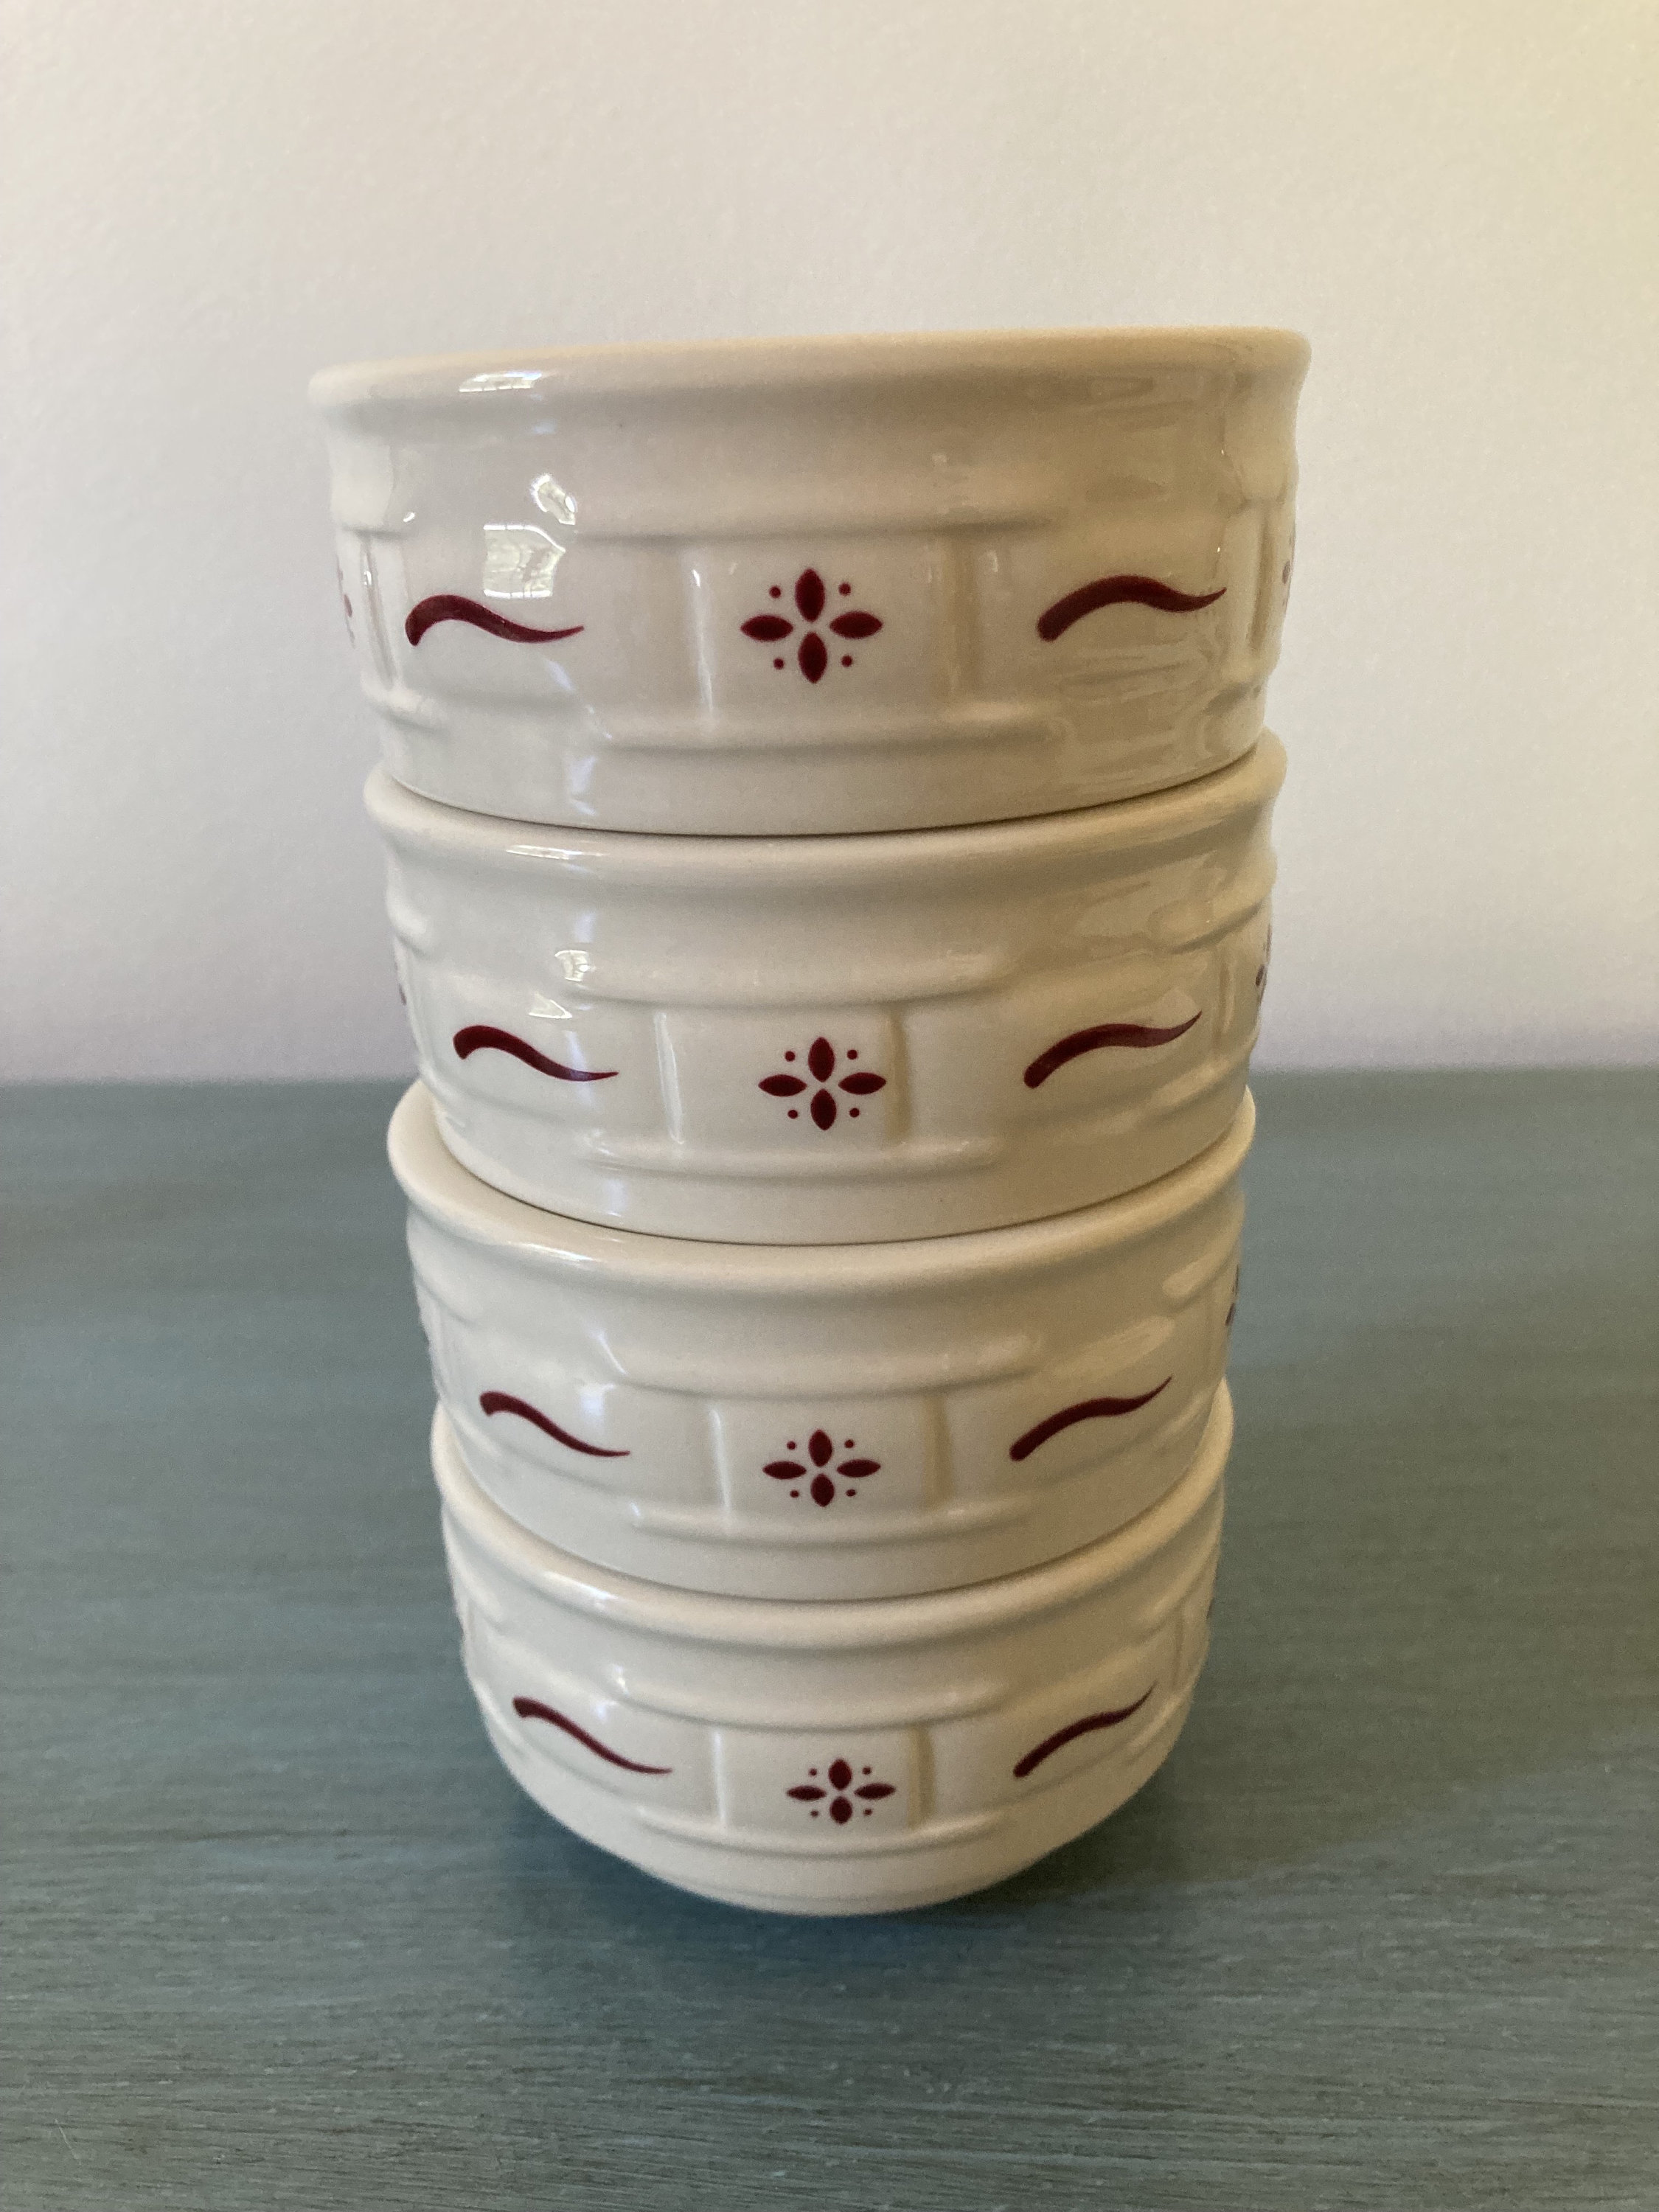 Longaberger Pottery All Purpose Bowl-Red & White Woven Traditions Design